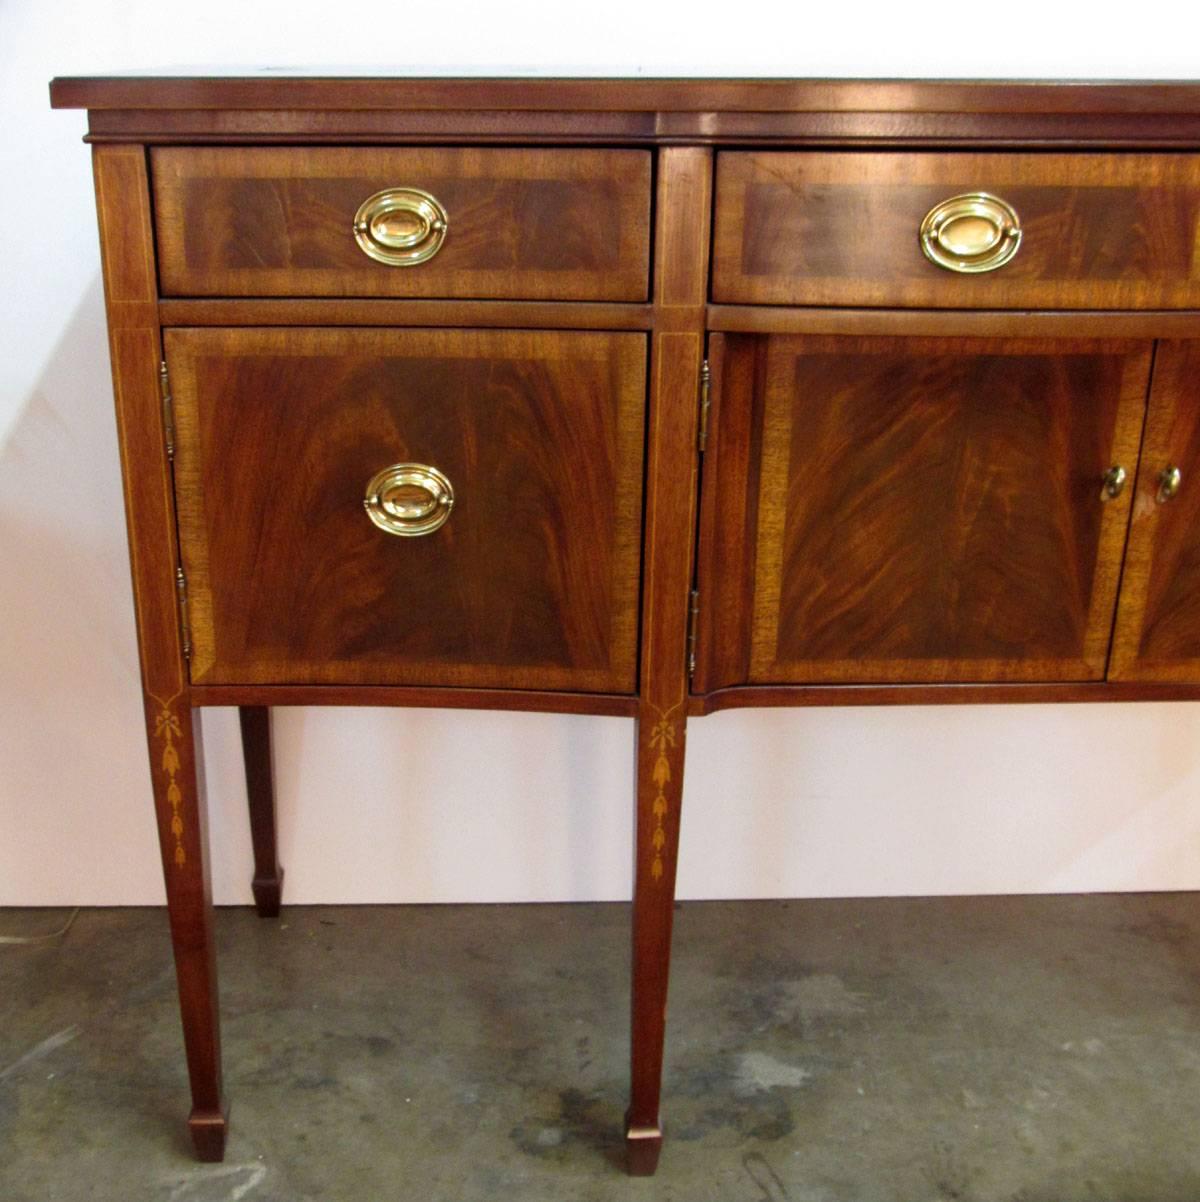 Late 20th century sideboard in the typical South Carolina style, mahogany with rosewood banding, bell flowers on the tapered legs above spade feet, and brass hardware. The silver cloth in the centre drawer is labelled 